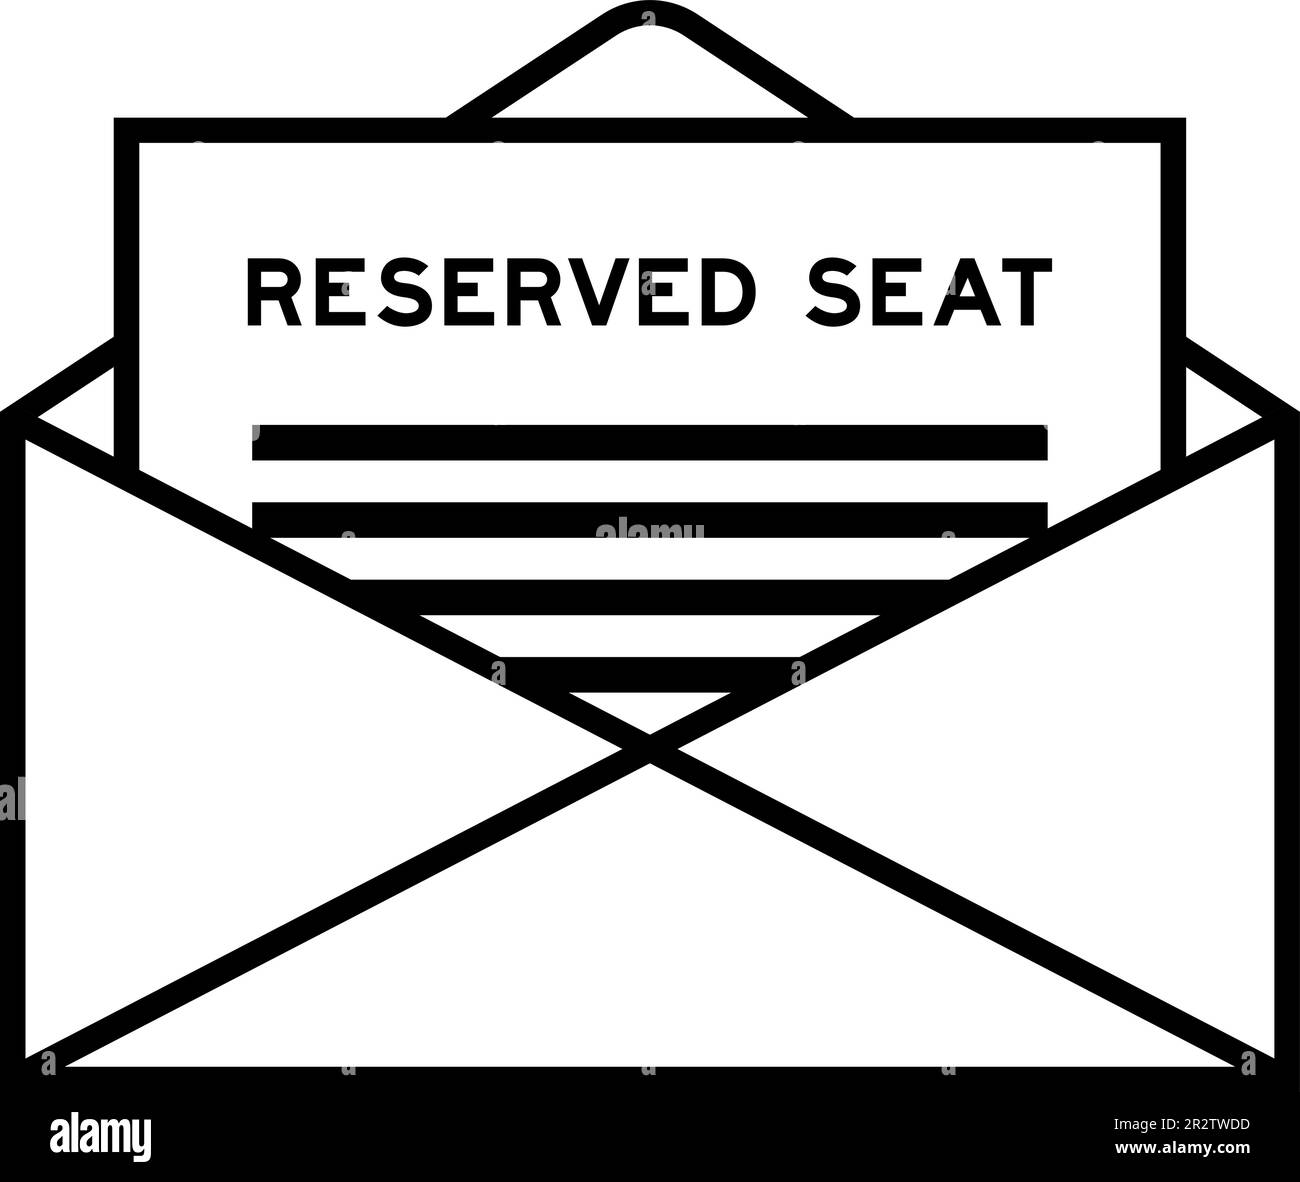 Envelope and letter sign with word reserved seat as the headline Stock Vector